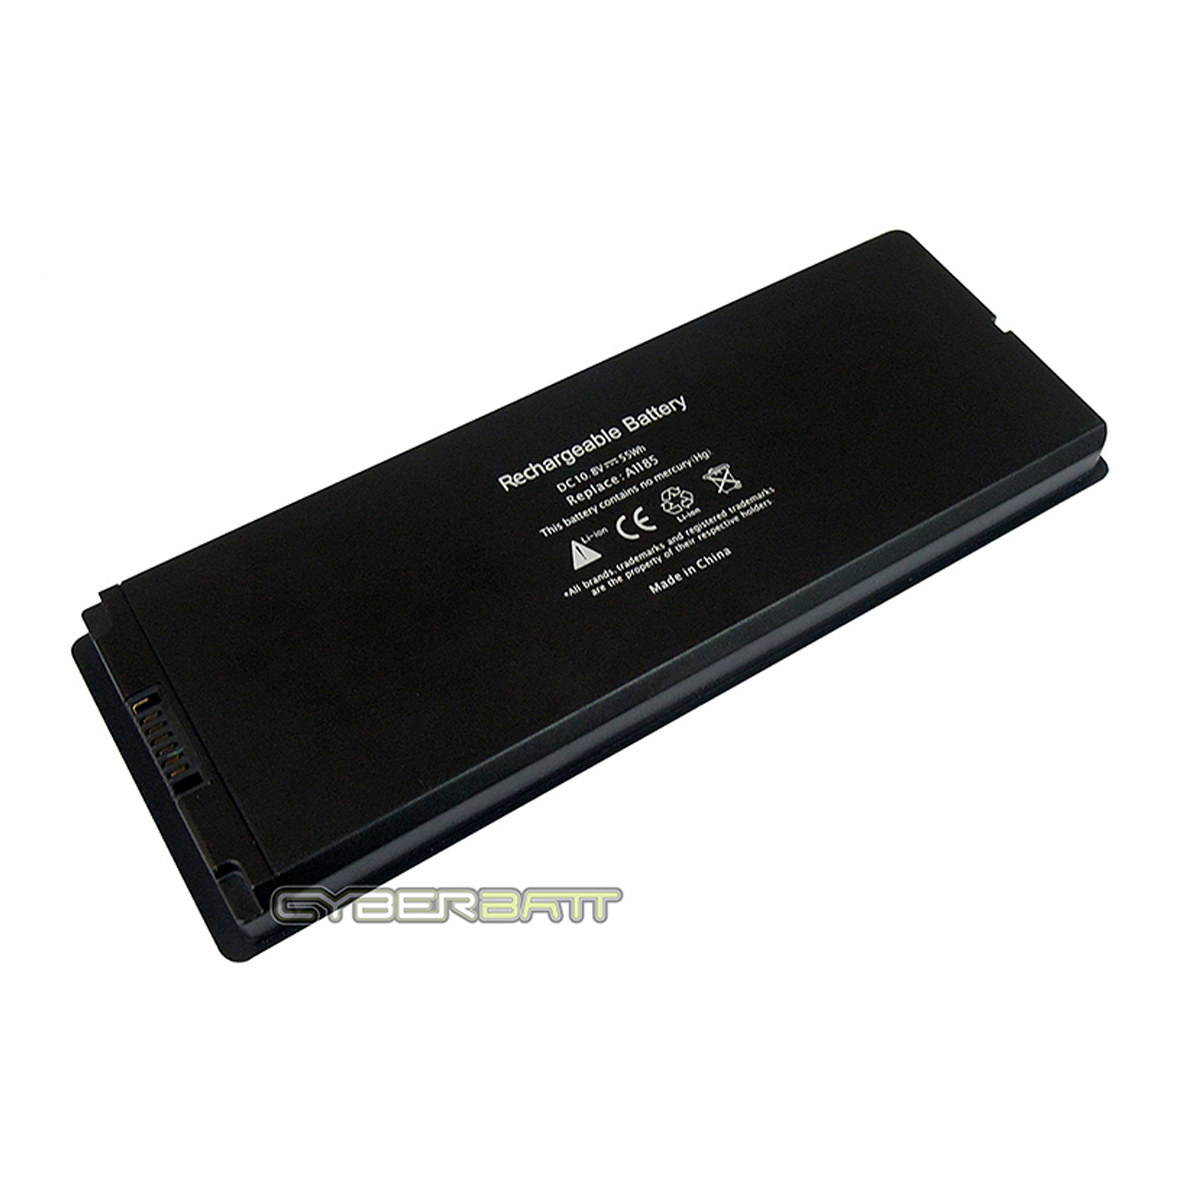 Battery MacBook A1185 For MacBook 13 inch A1181 (Late 2006-Mid 2009)Black 10.8V-55Wh (OEM) 